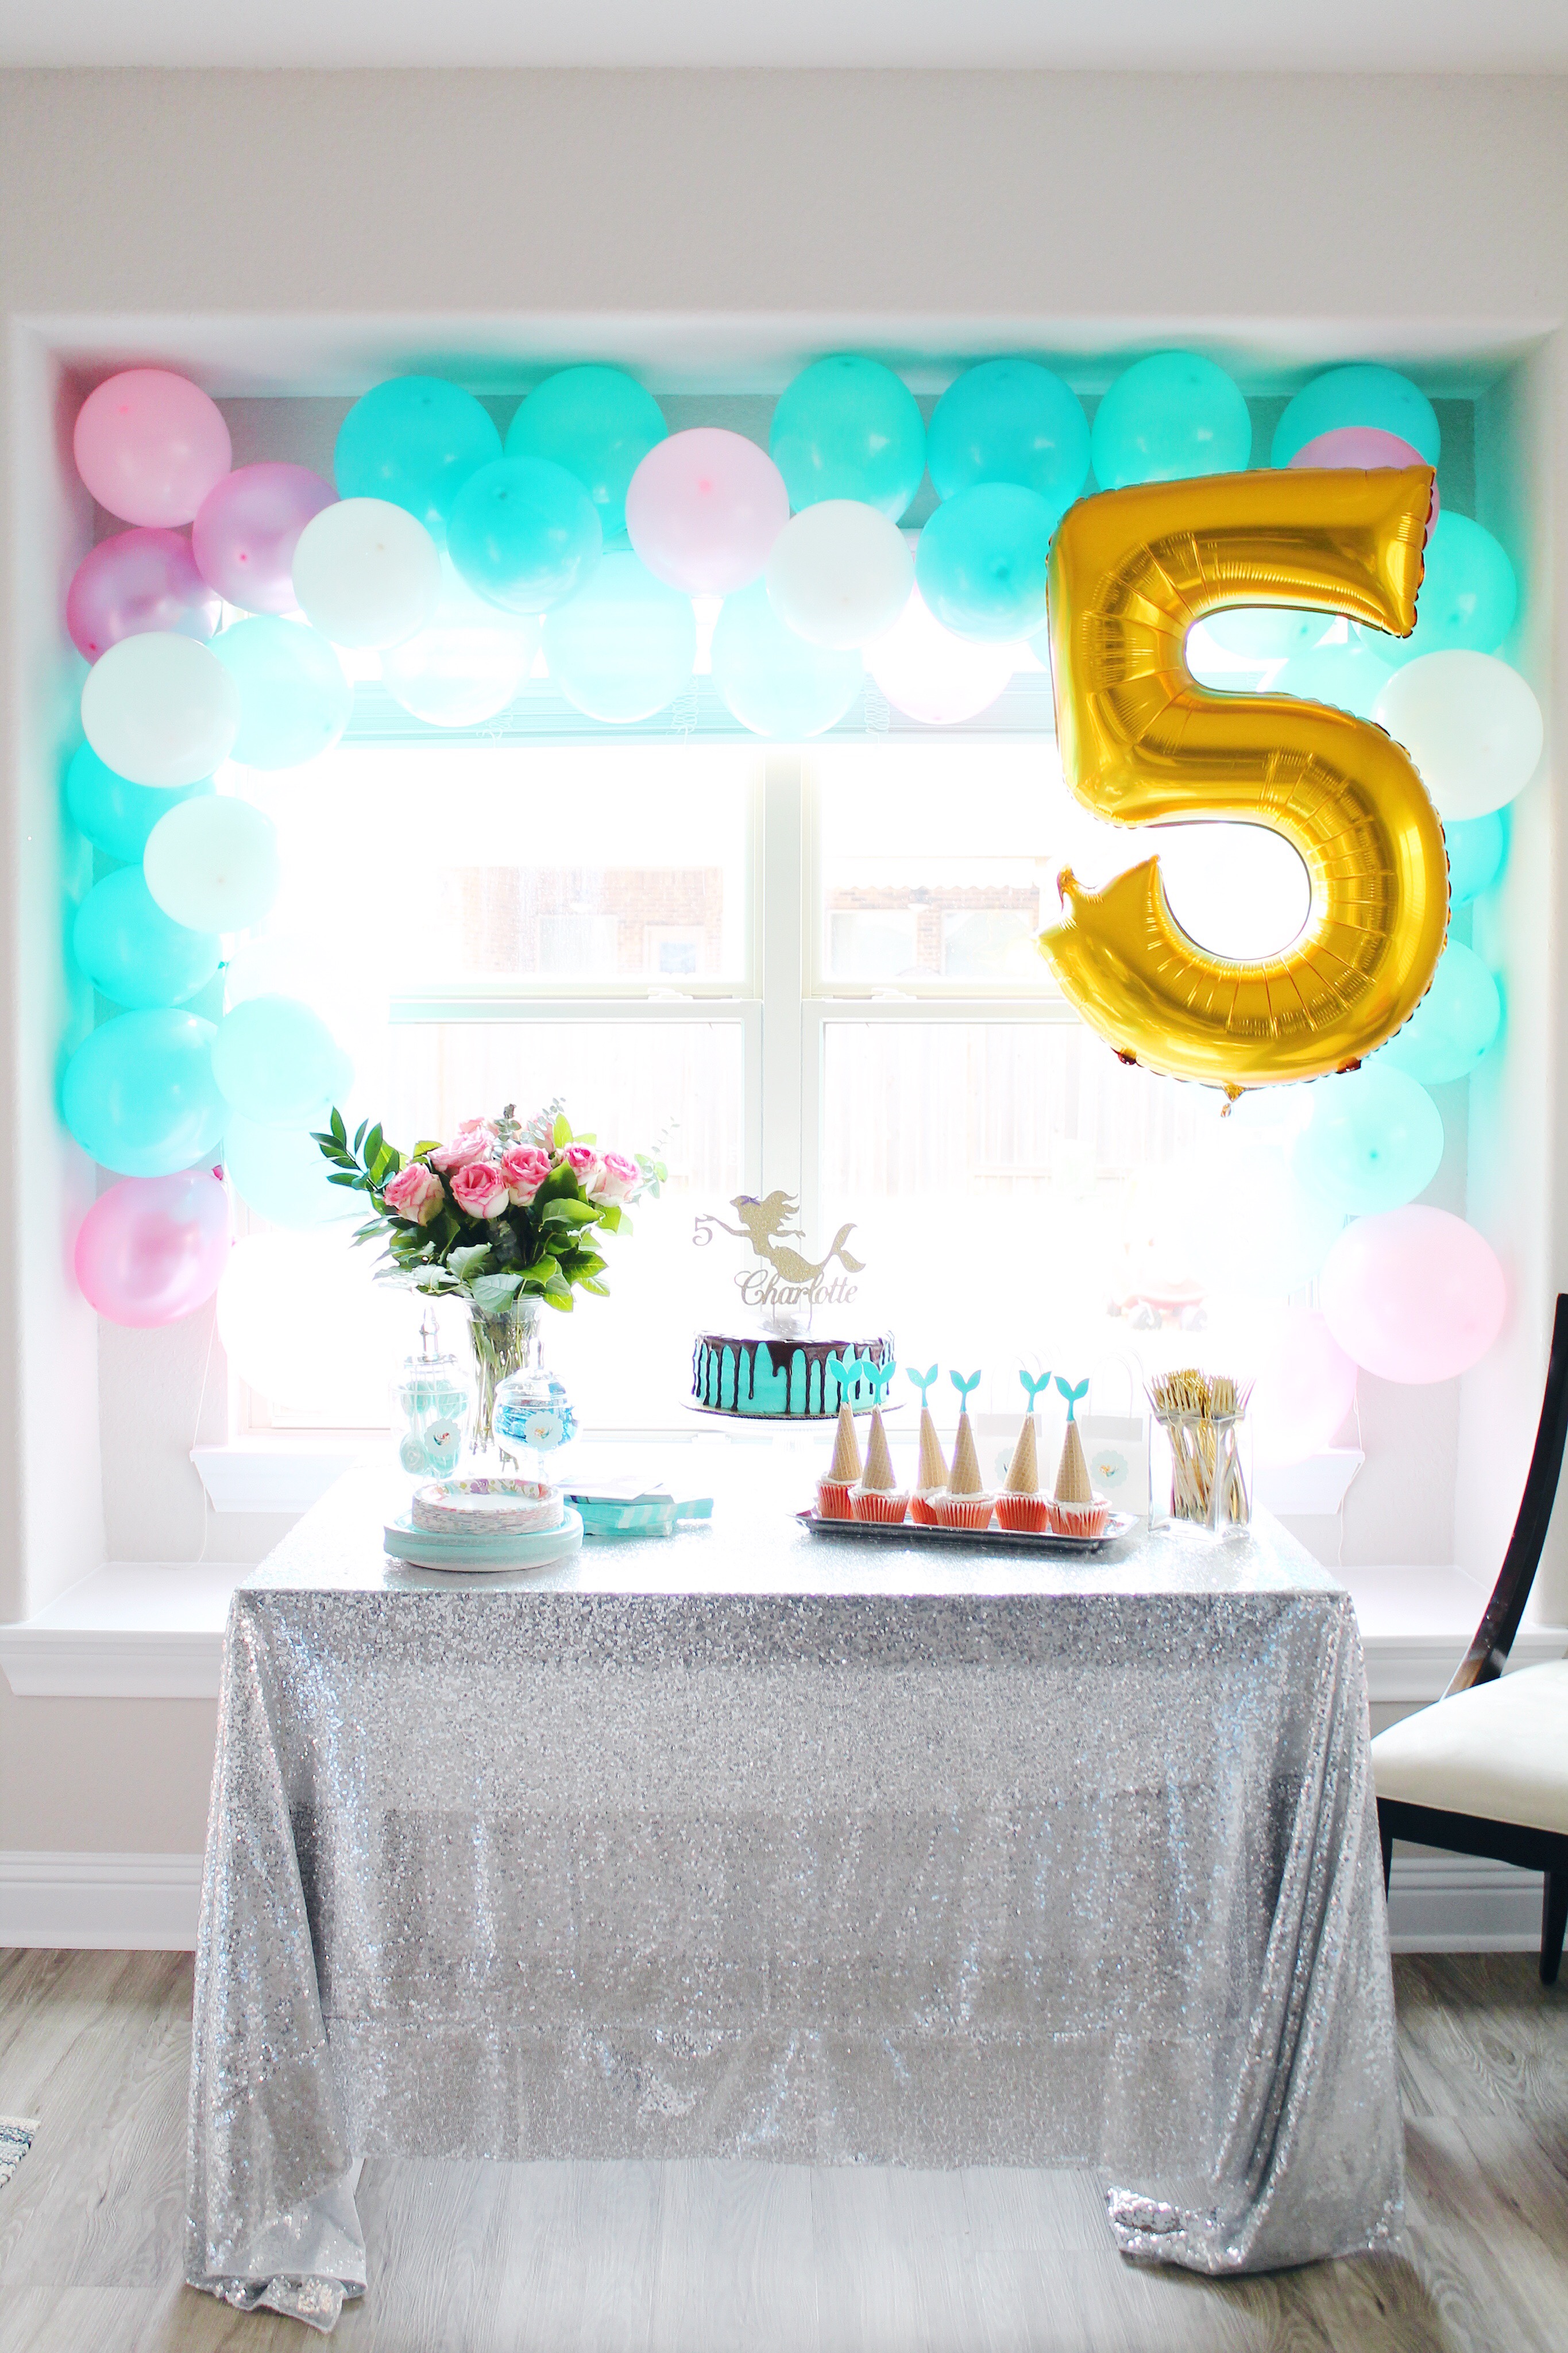 Mermaid Inspired Birthday Party. DIY balloon arch and all the other details for the perfect mermaid party! #birthdayparty #birthdaypartydecor #partydecor